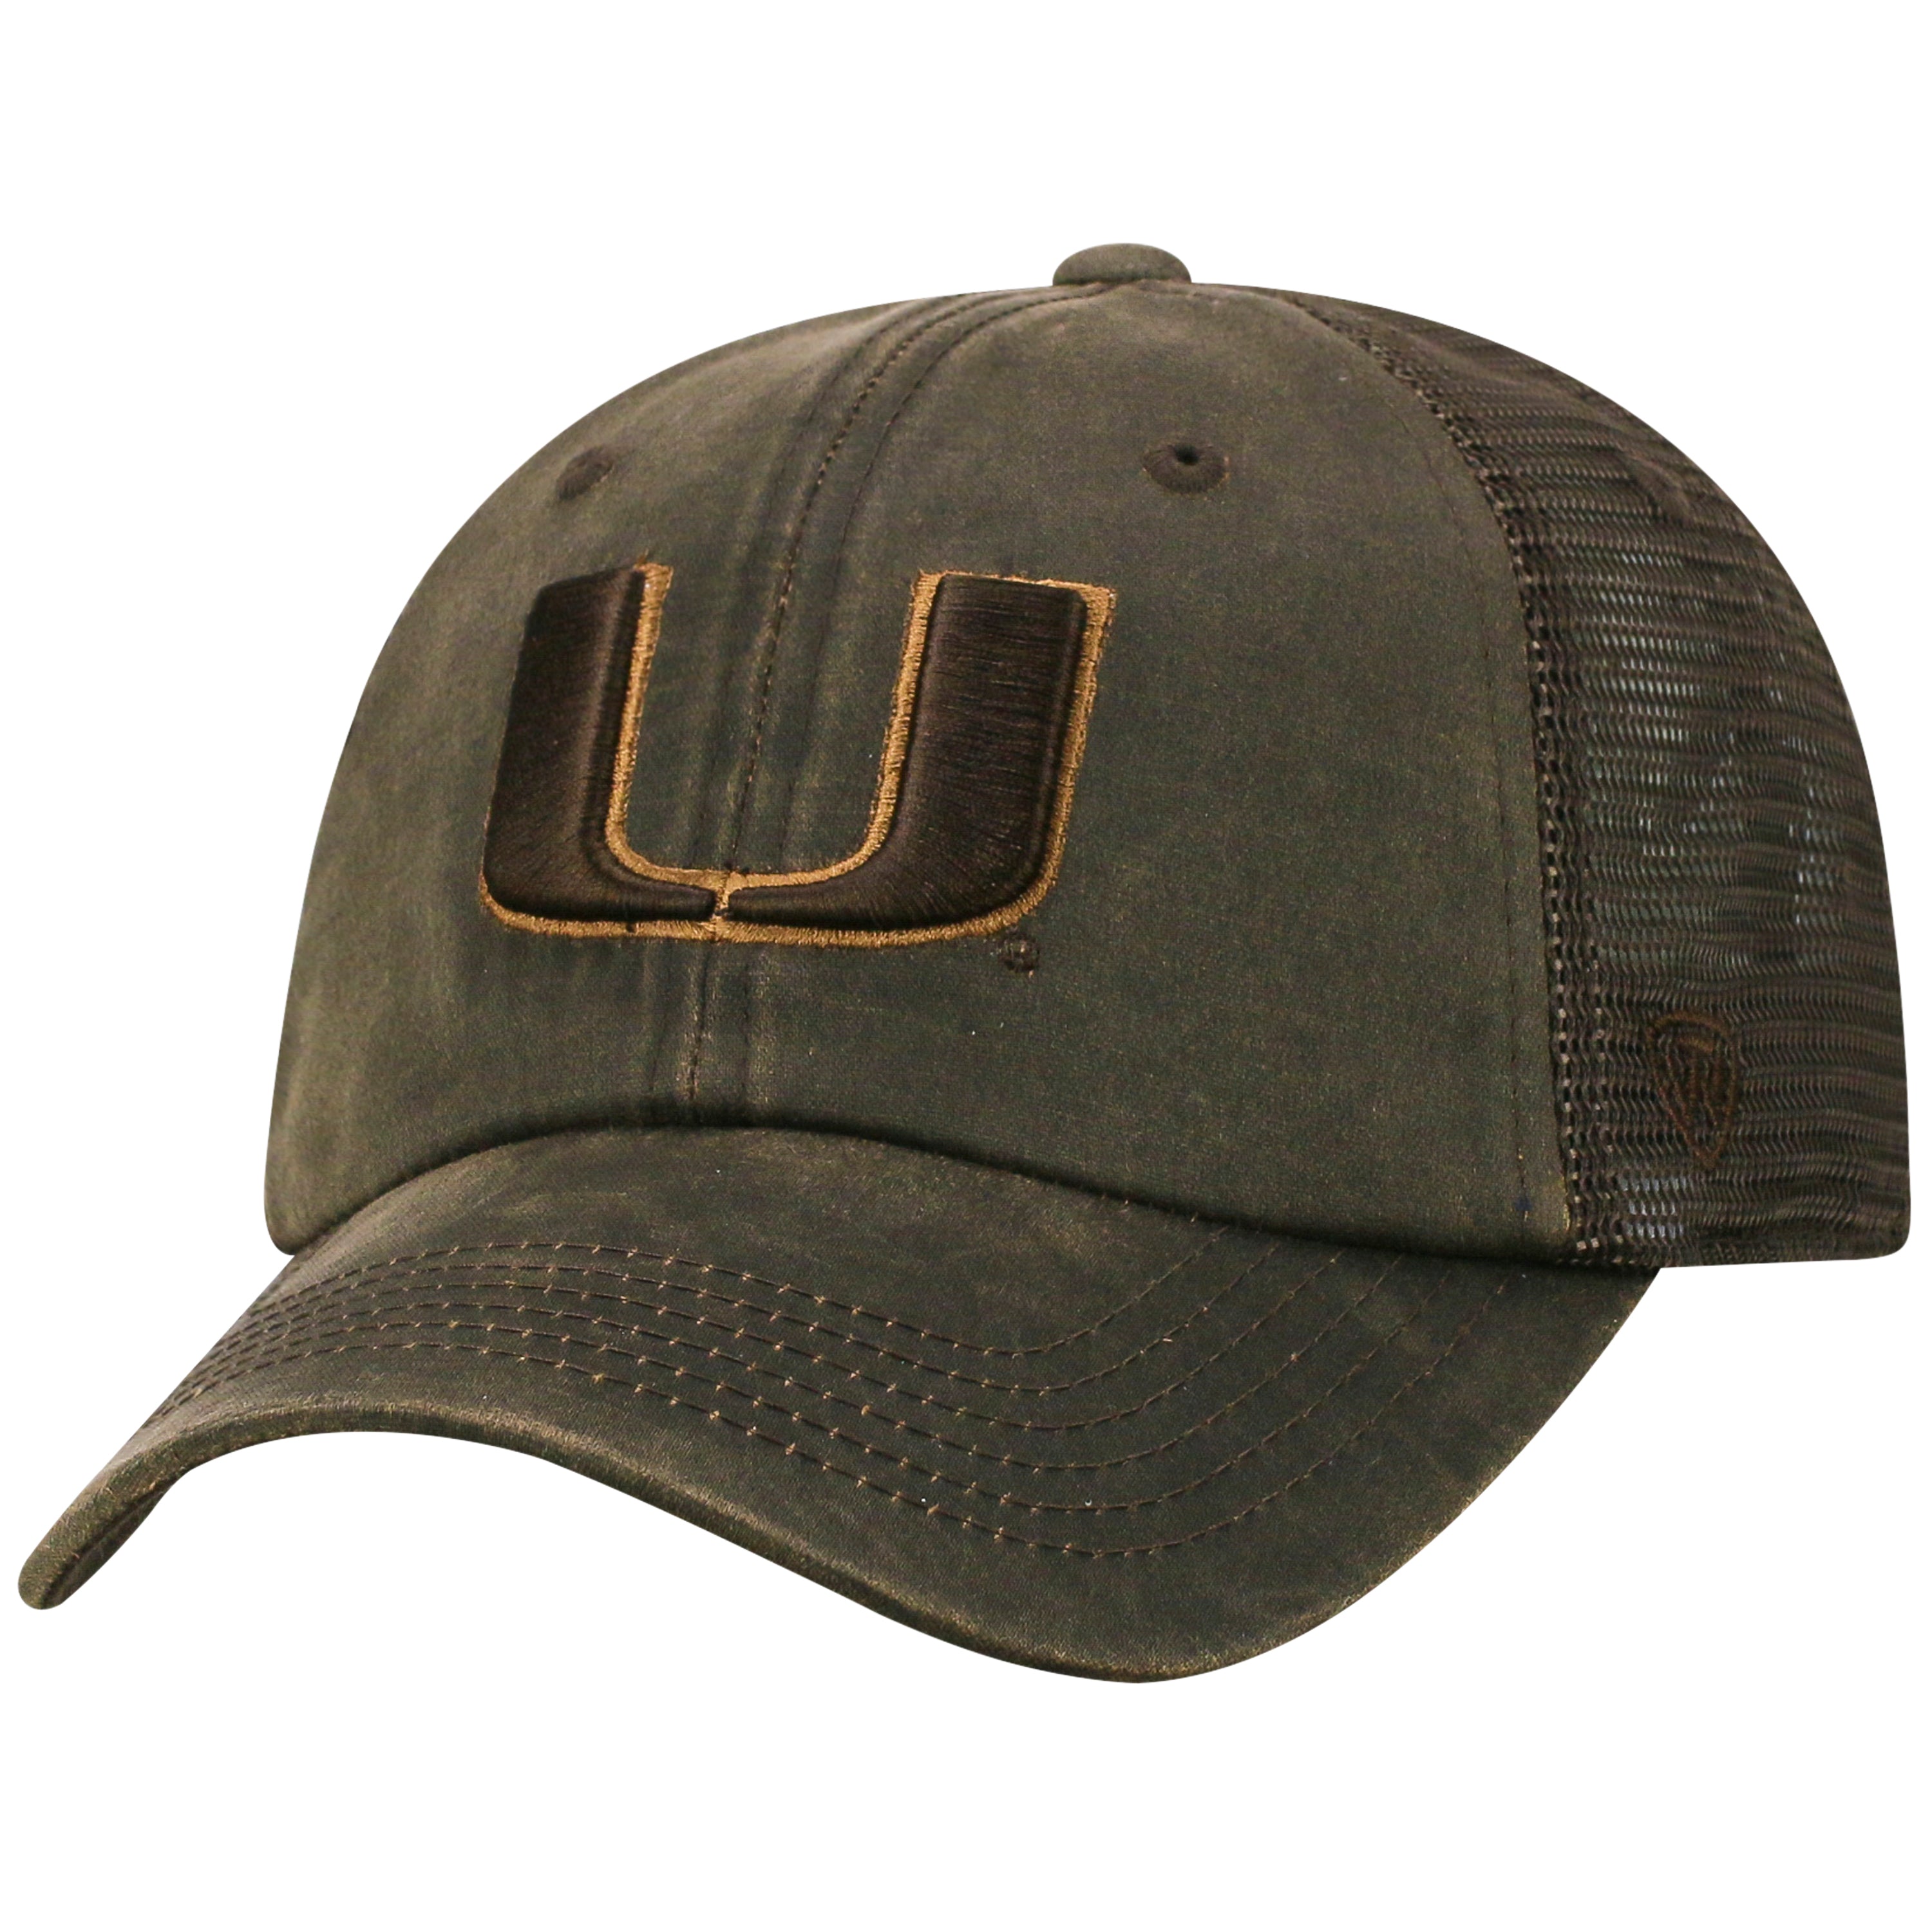 Miami Hurricanes Top of the World 2018 Chestnut Snapback Brown